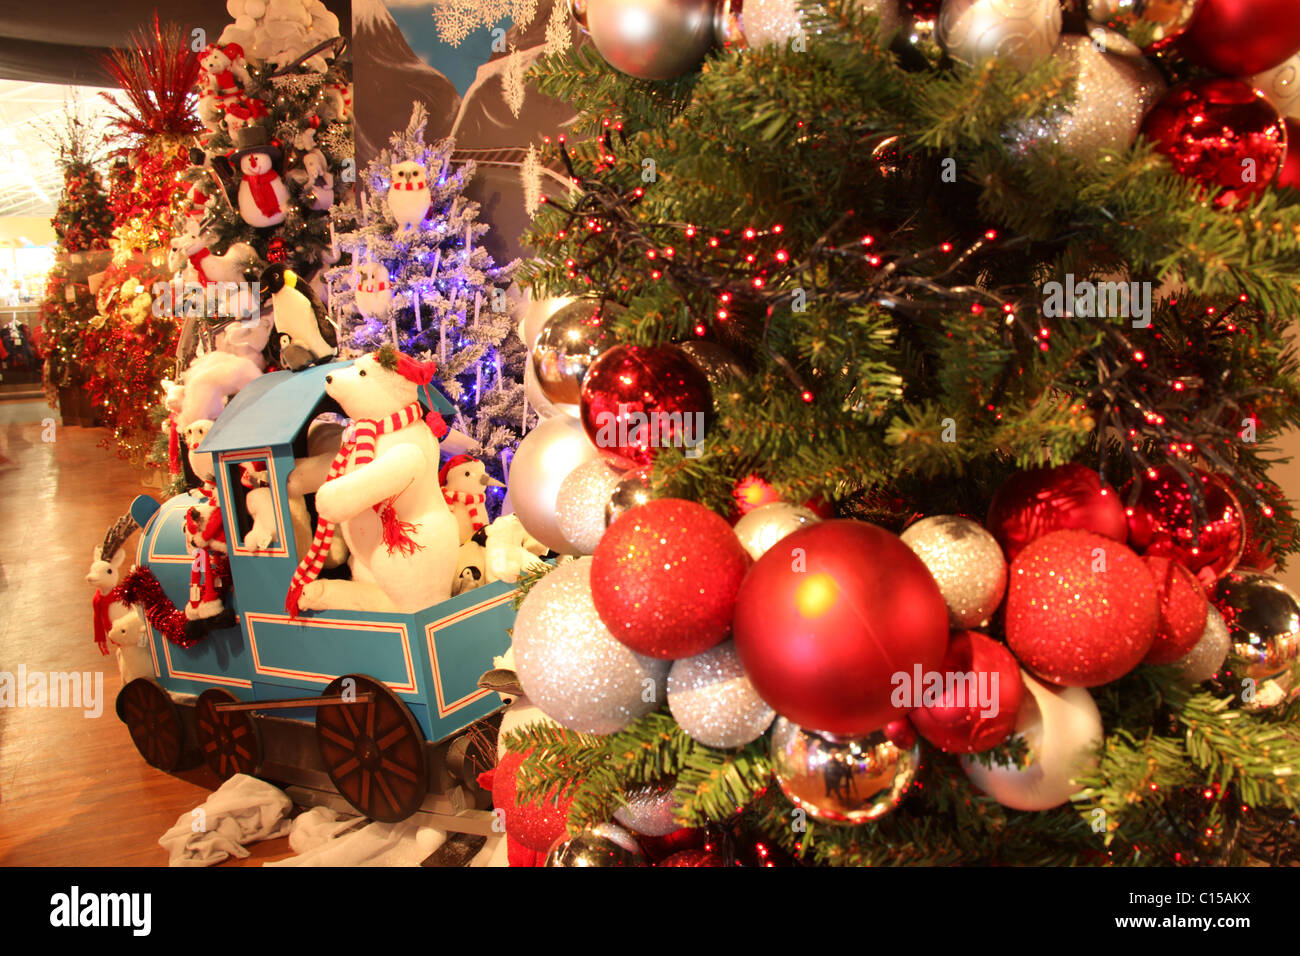 Christmas display containing decorations and retail goods at Bents ...